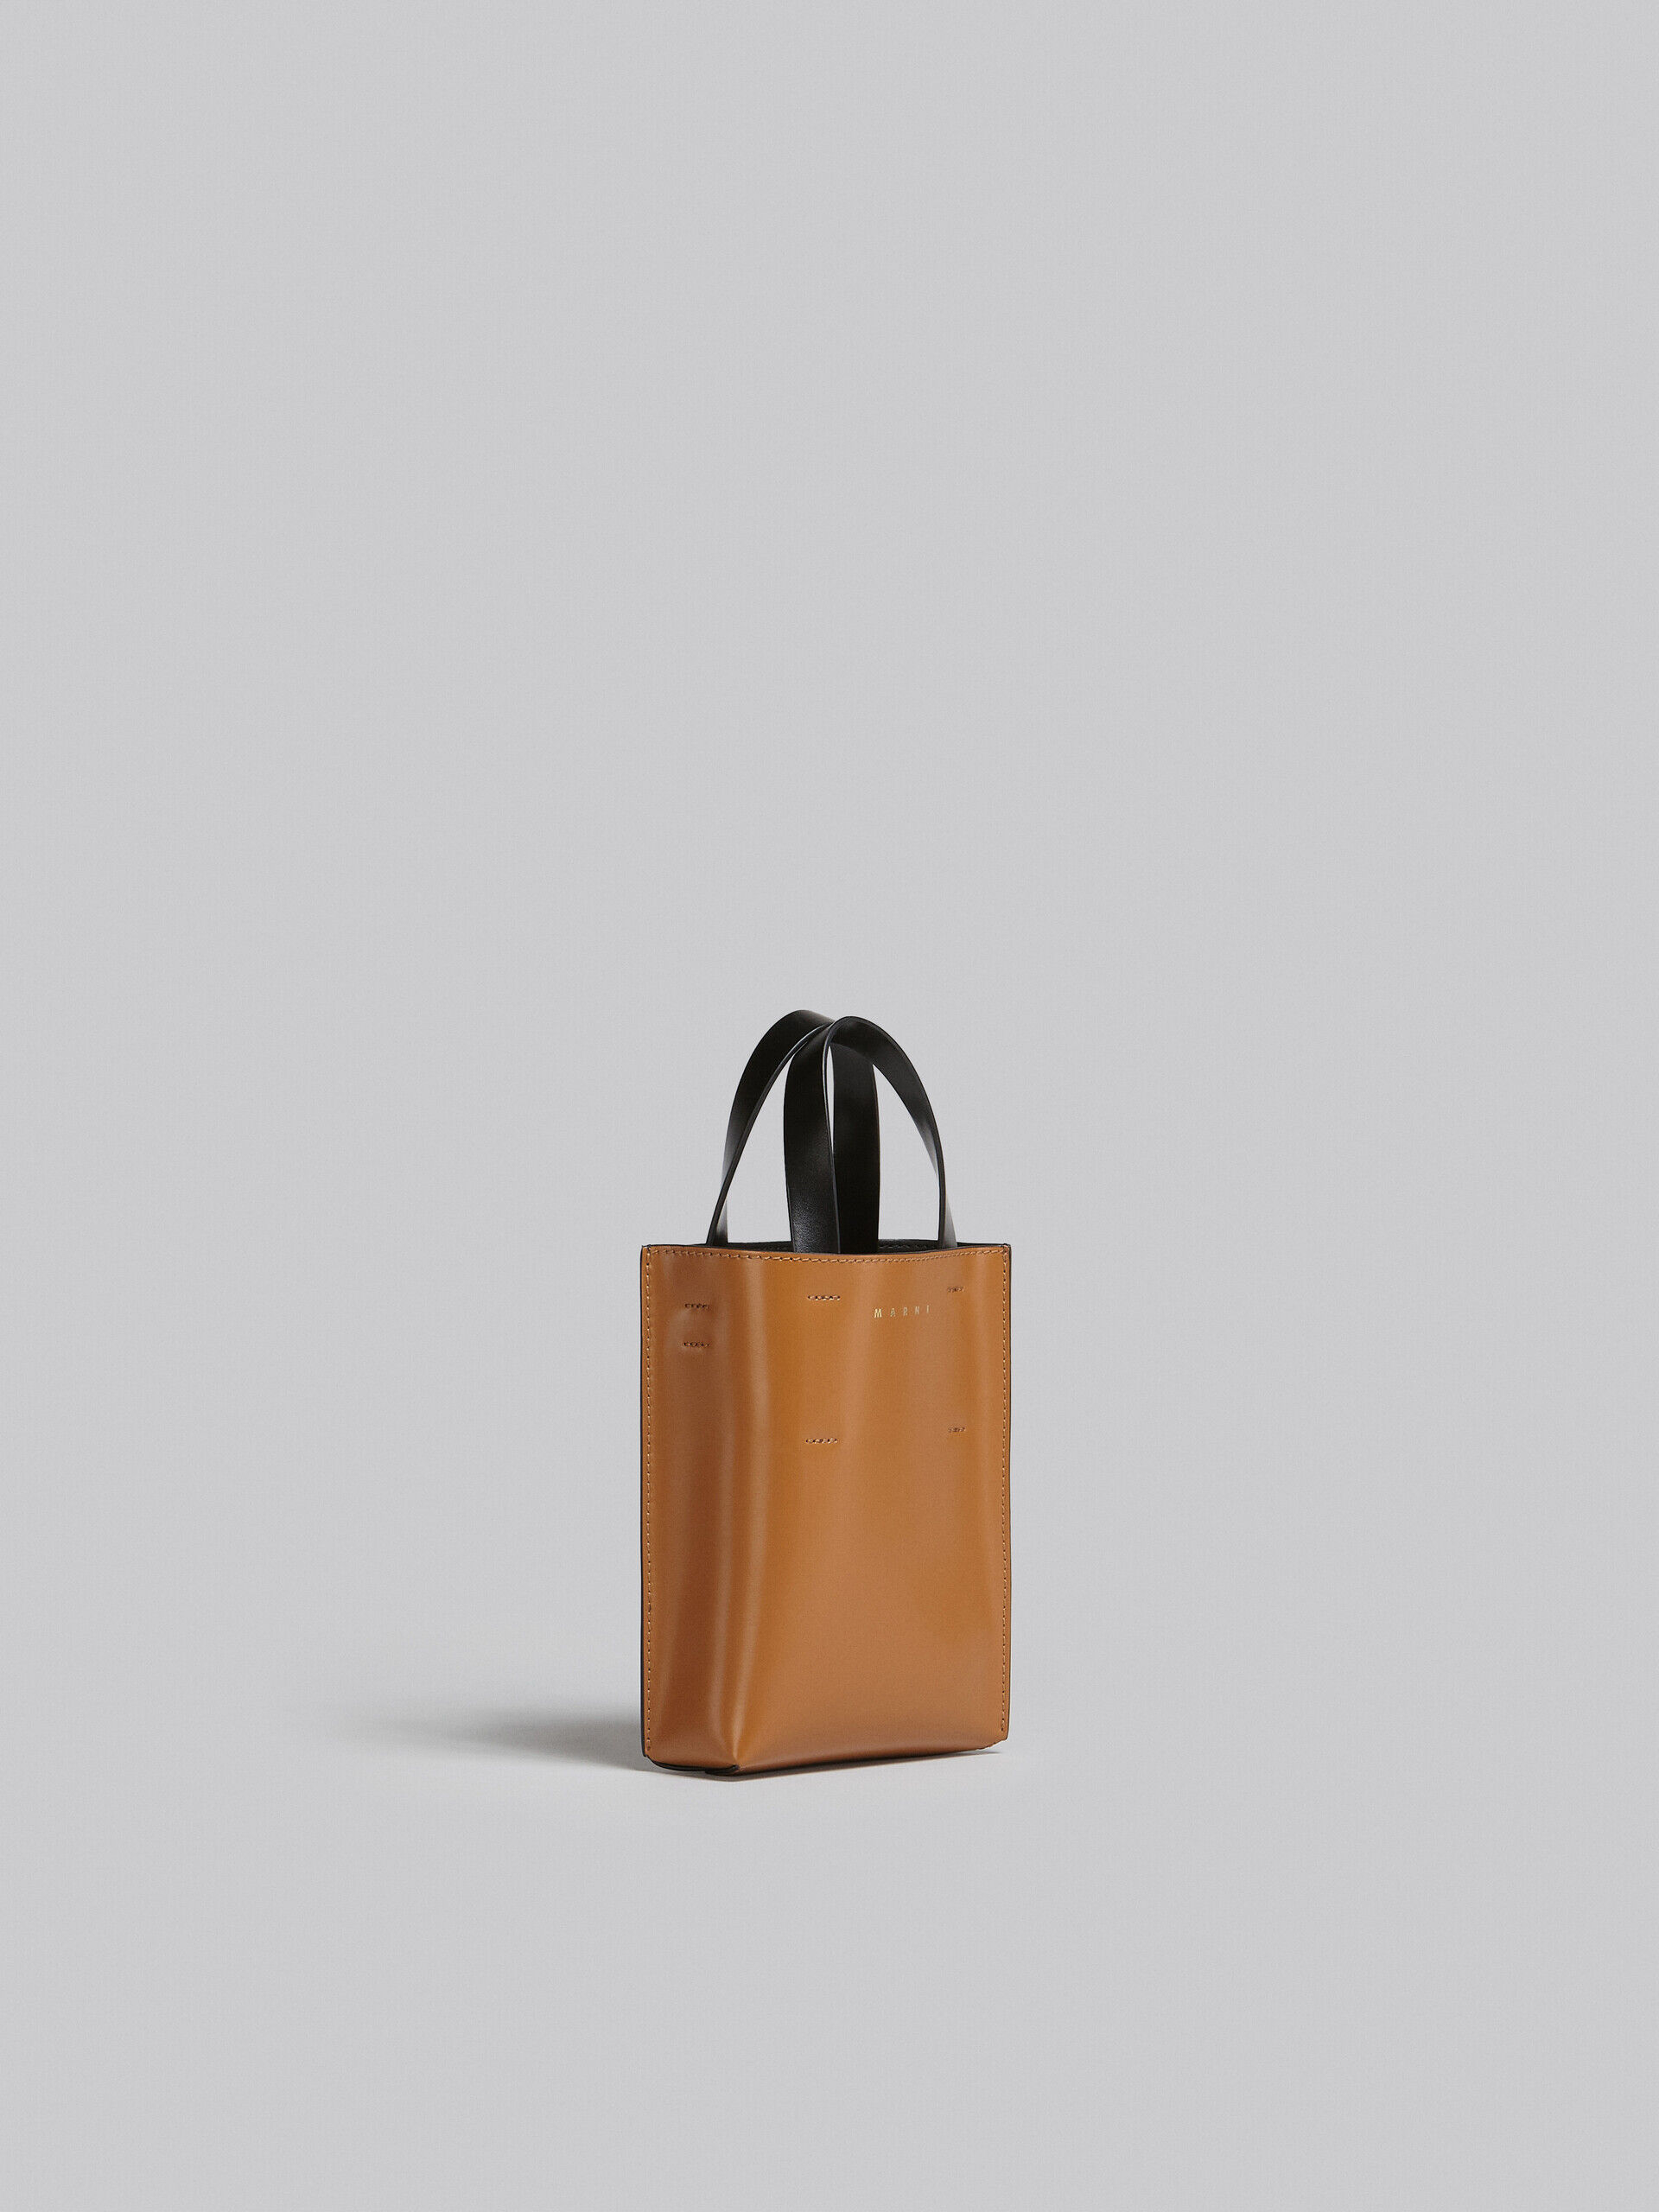 Museo Nano Bag in brown and black leather | Marni